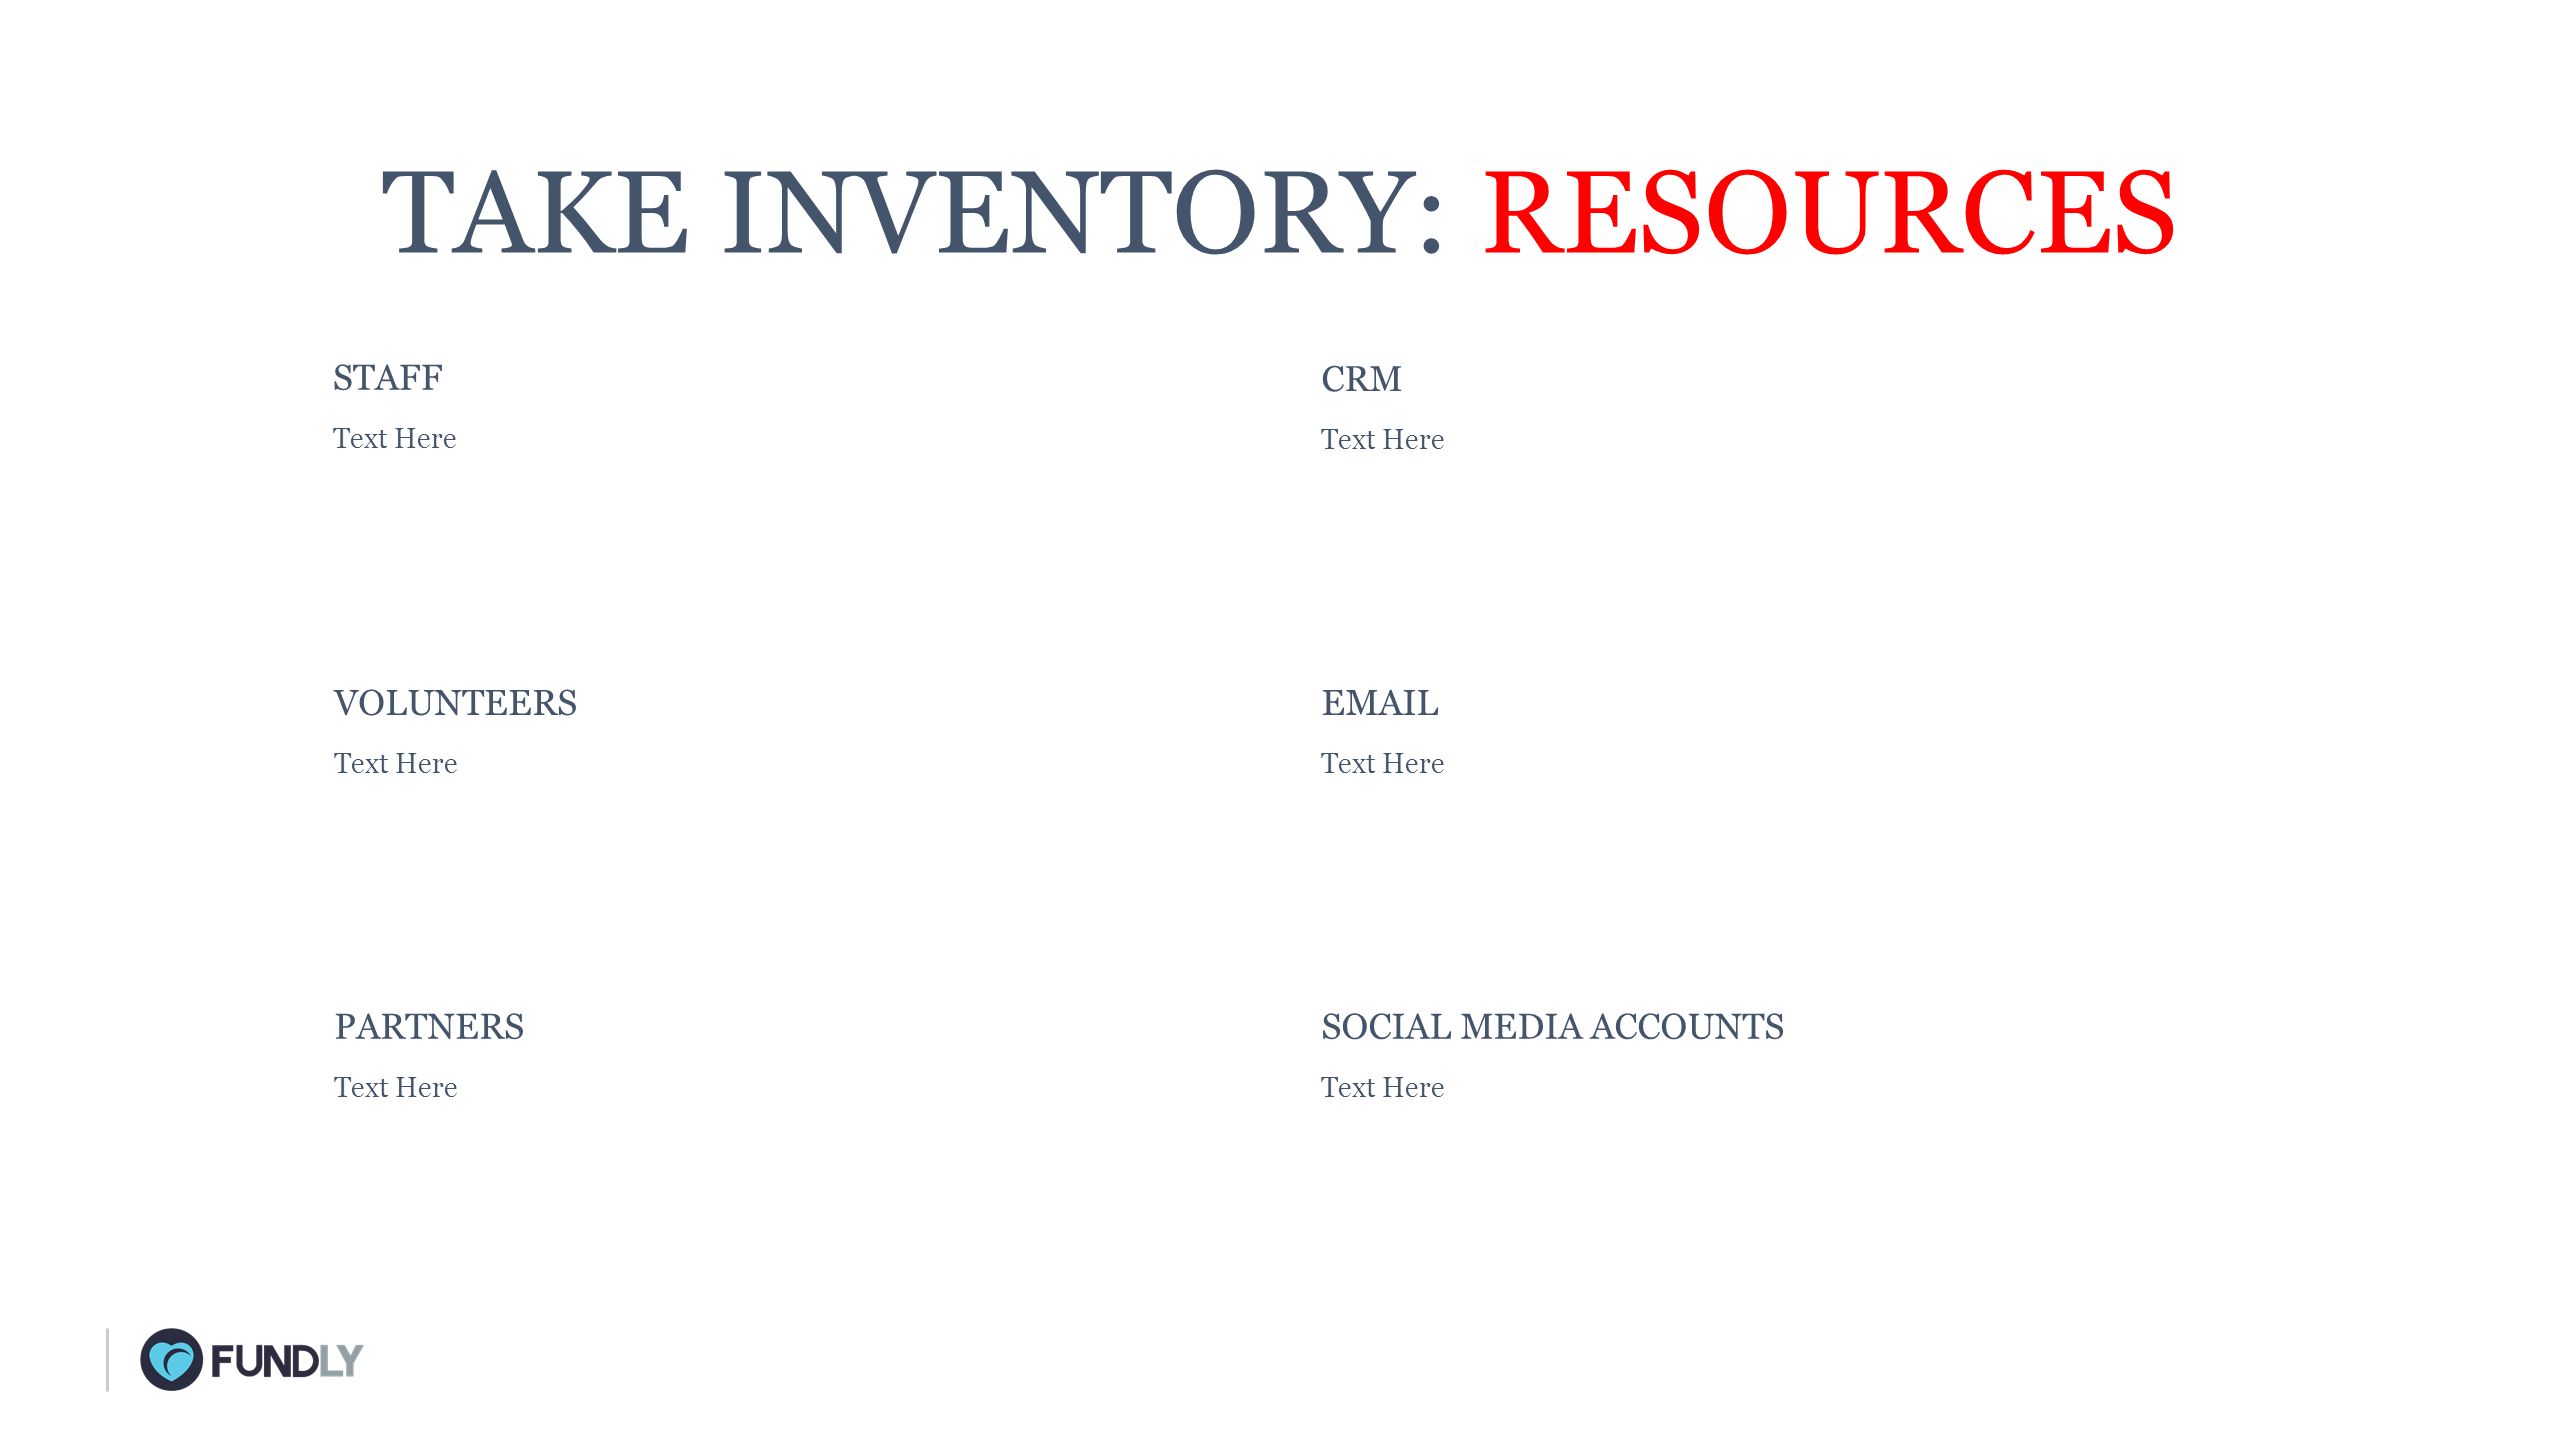 TAKE INVENTORY: RESOURCES STAFF Text Here CRM Text Here VOLUNTEERS Text Here  Text Here PARTNERS Text Here SOCIAL MEDIA ACCOUNTS Text Here